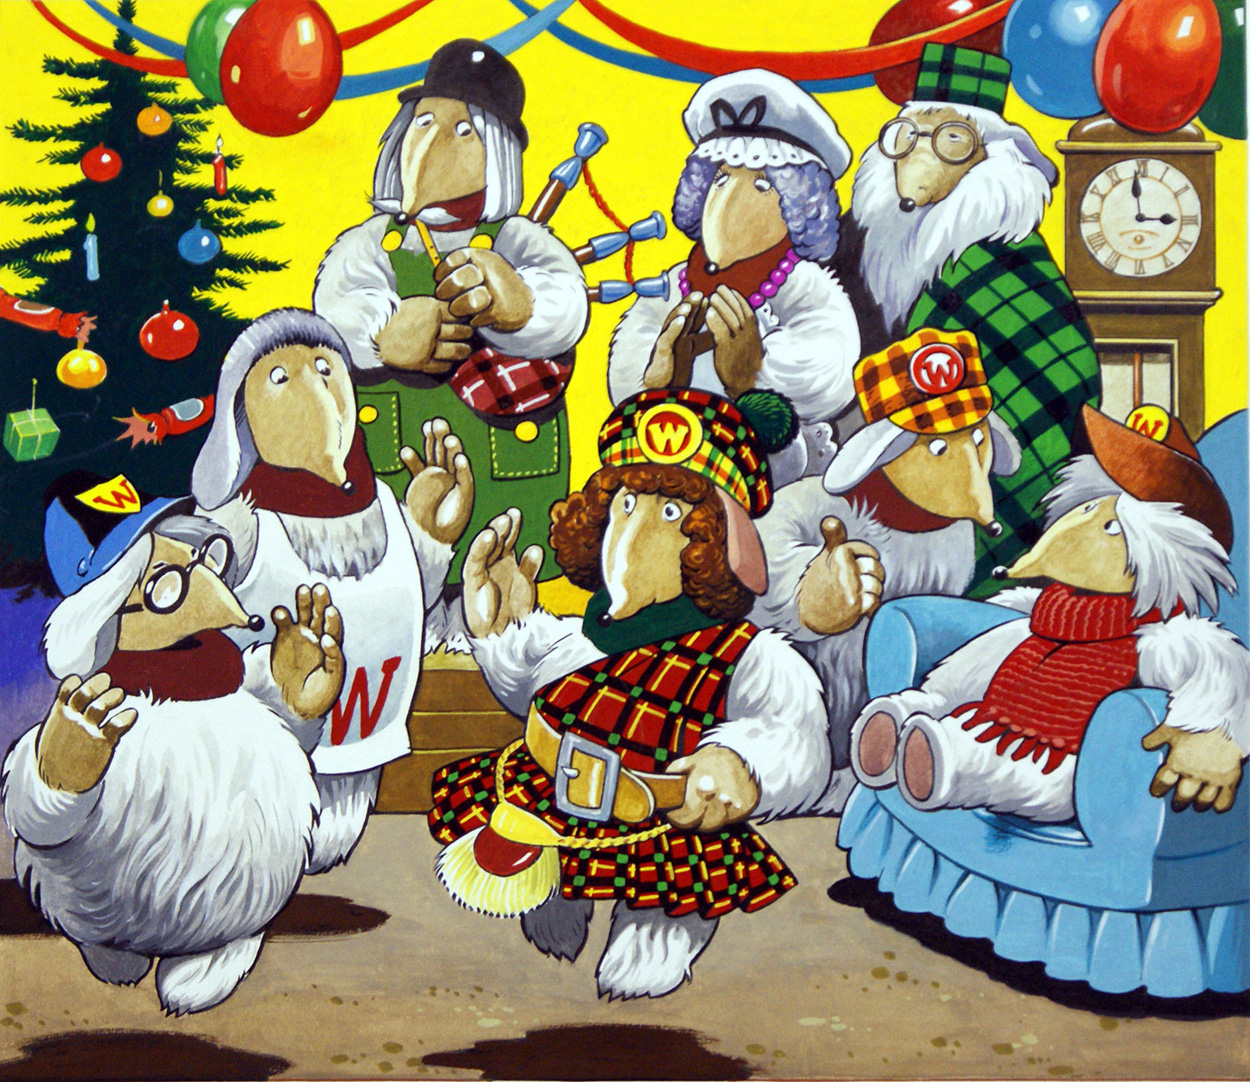 The Wombles: A Wombling Hogmanay (Original) art by The Wombles (Blasco) Art at The Illustration Art Gallery